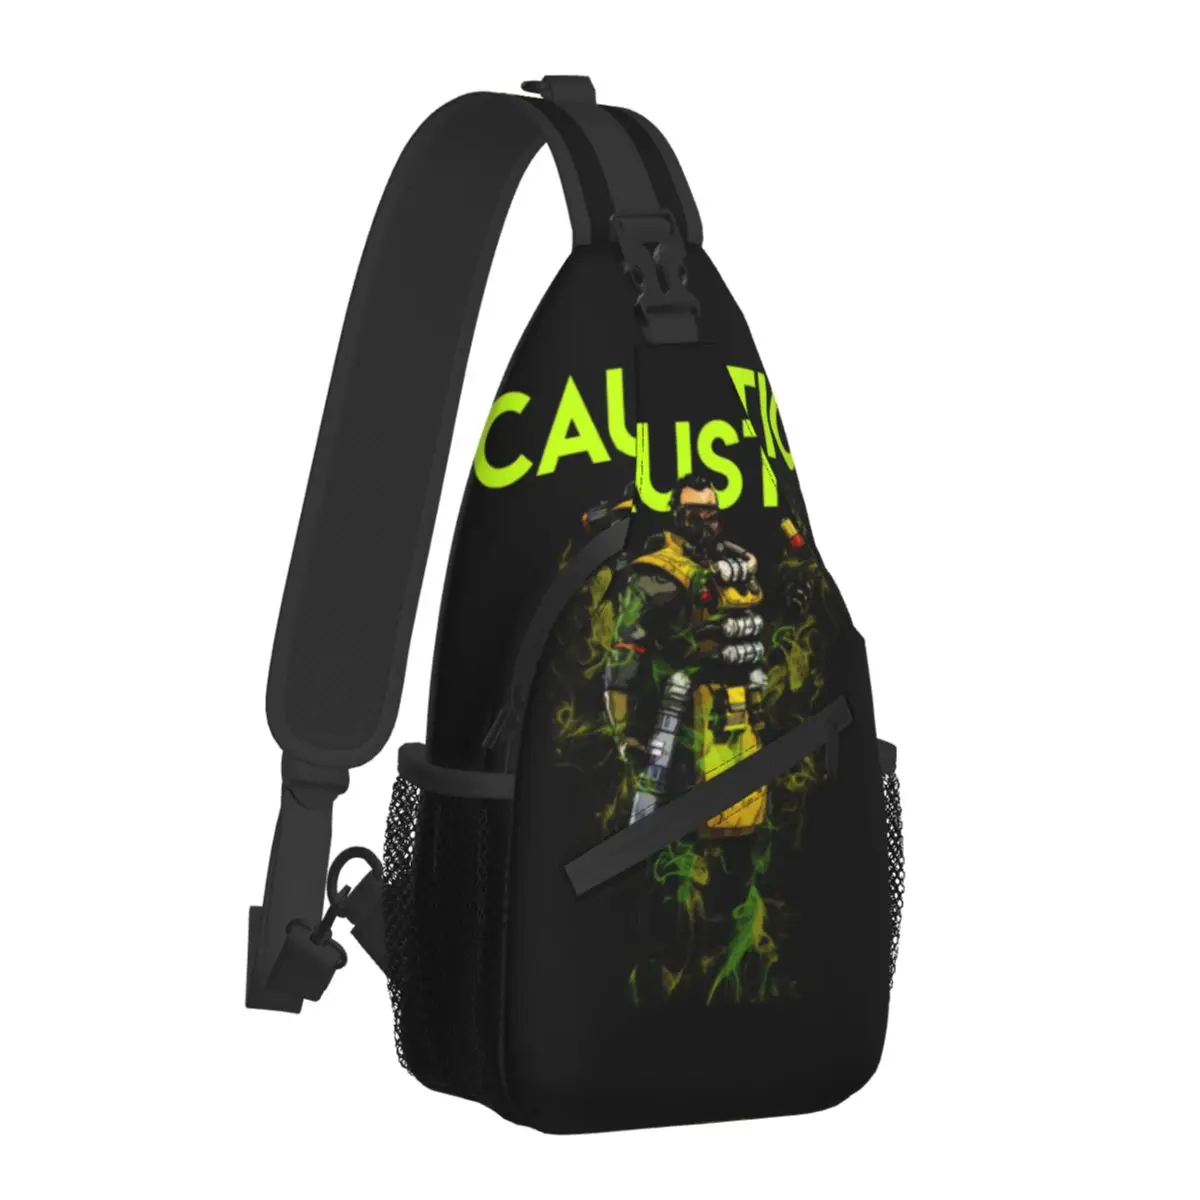 

Caustic Smokey Shoulder Bags Apex legends Fashion Chest Bag Male Travel Motorcycle Sling Bag Business Designer Crossbody Bags